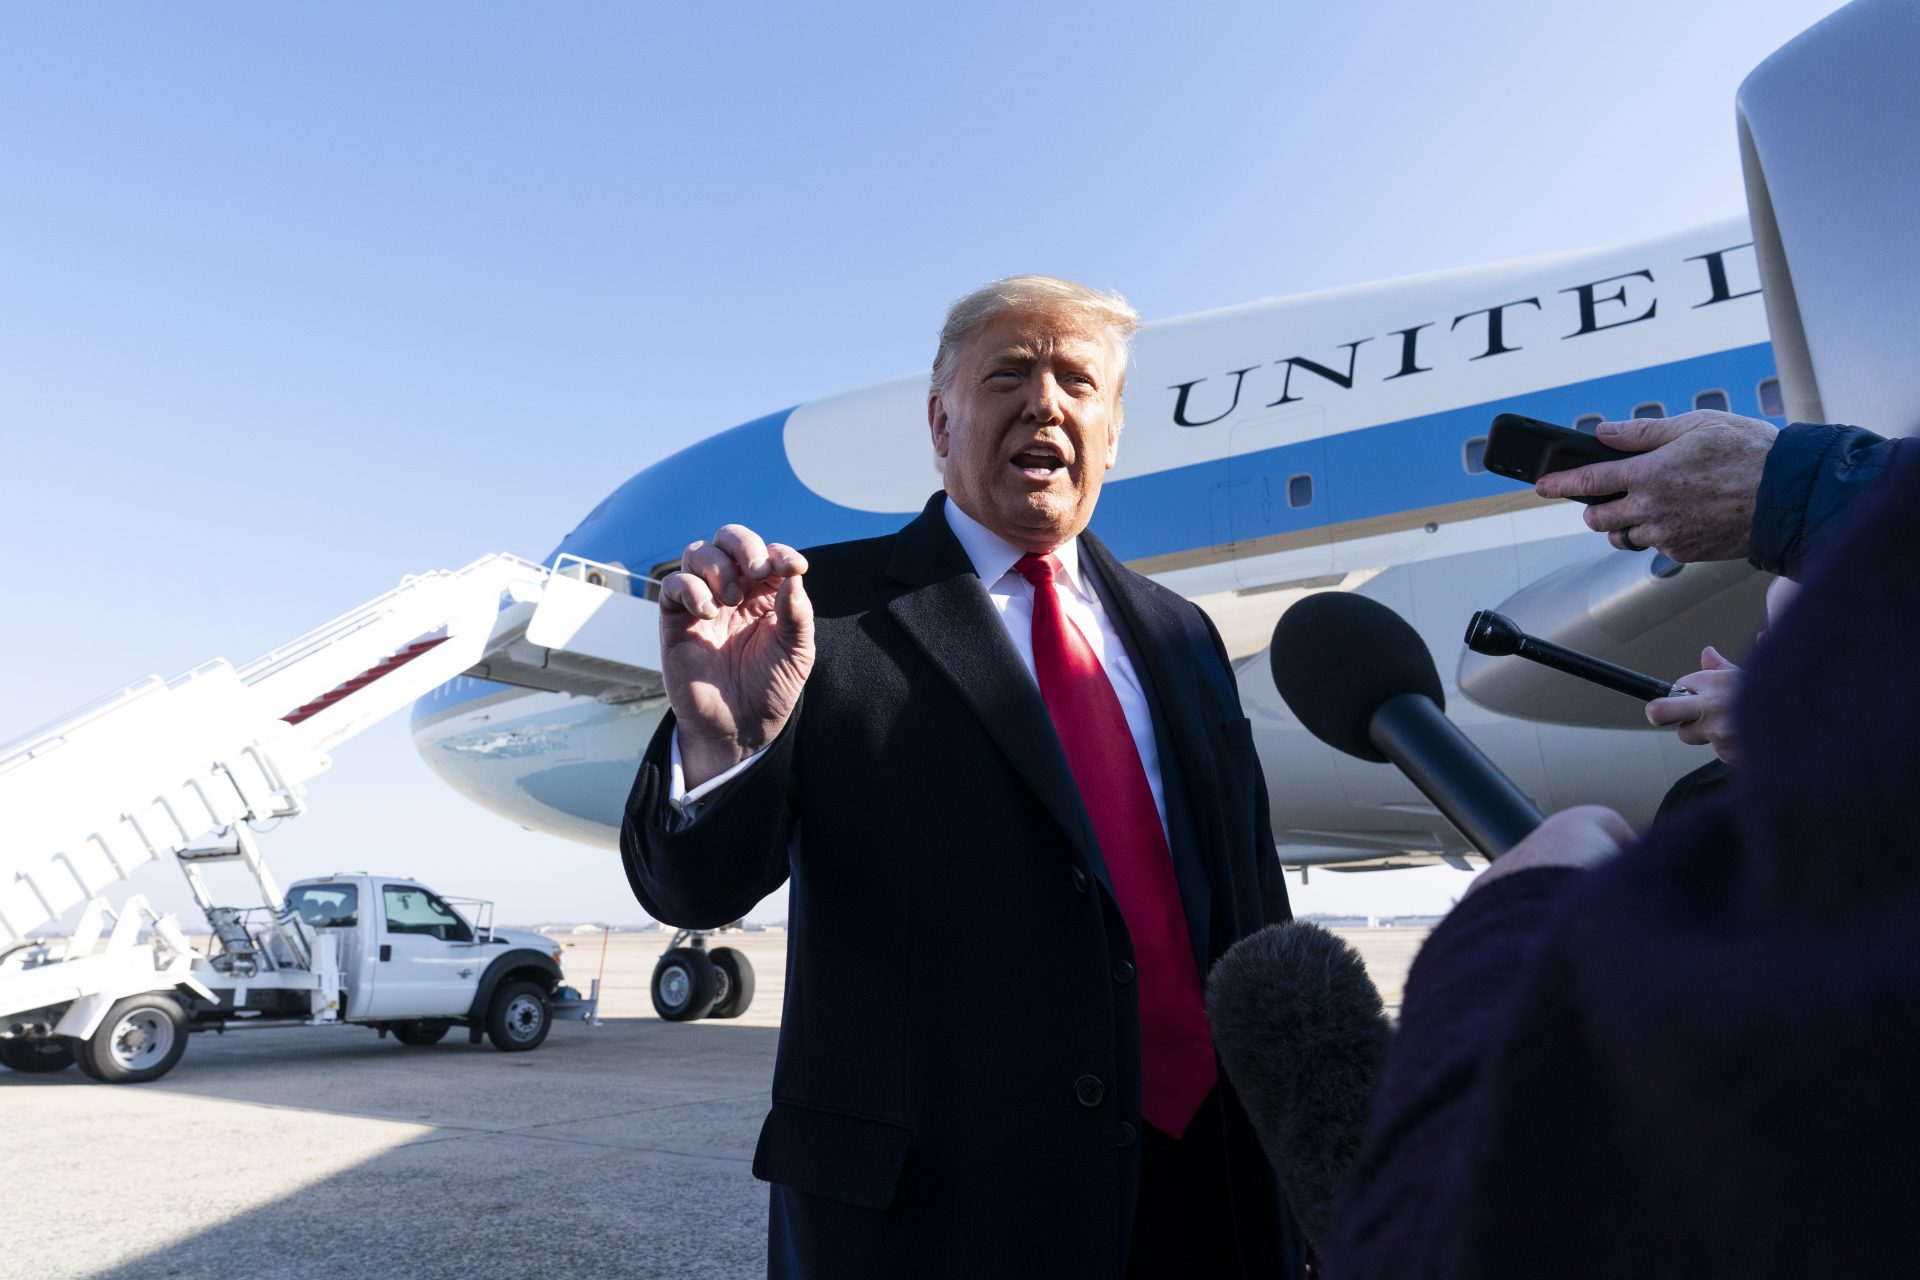 President Donald Trump speaks with reporters before boarding Air Force One upon departure, Tuesday, Jan. 12, 2021, at Andrews Air Force Base, Md. The President is traveling to Texas.